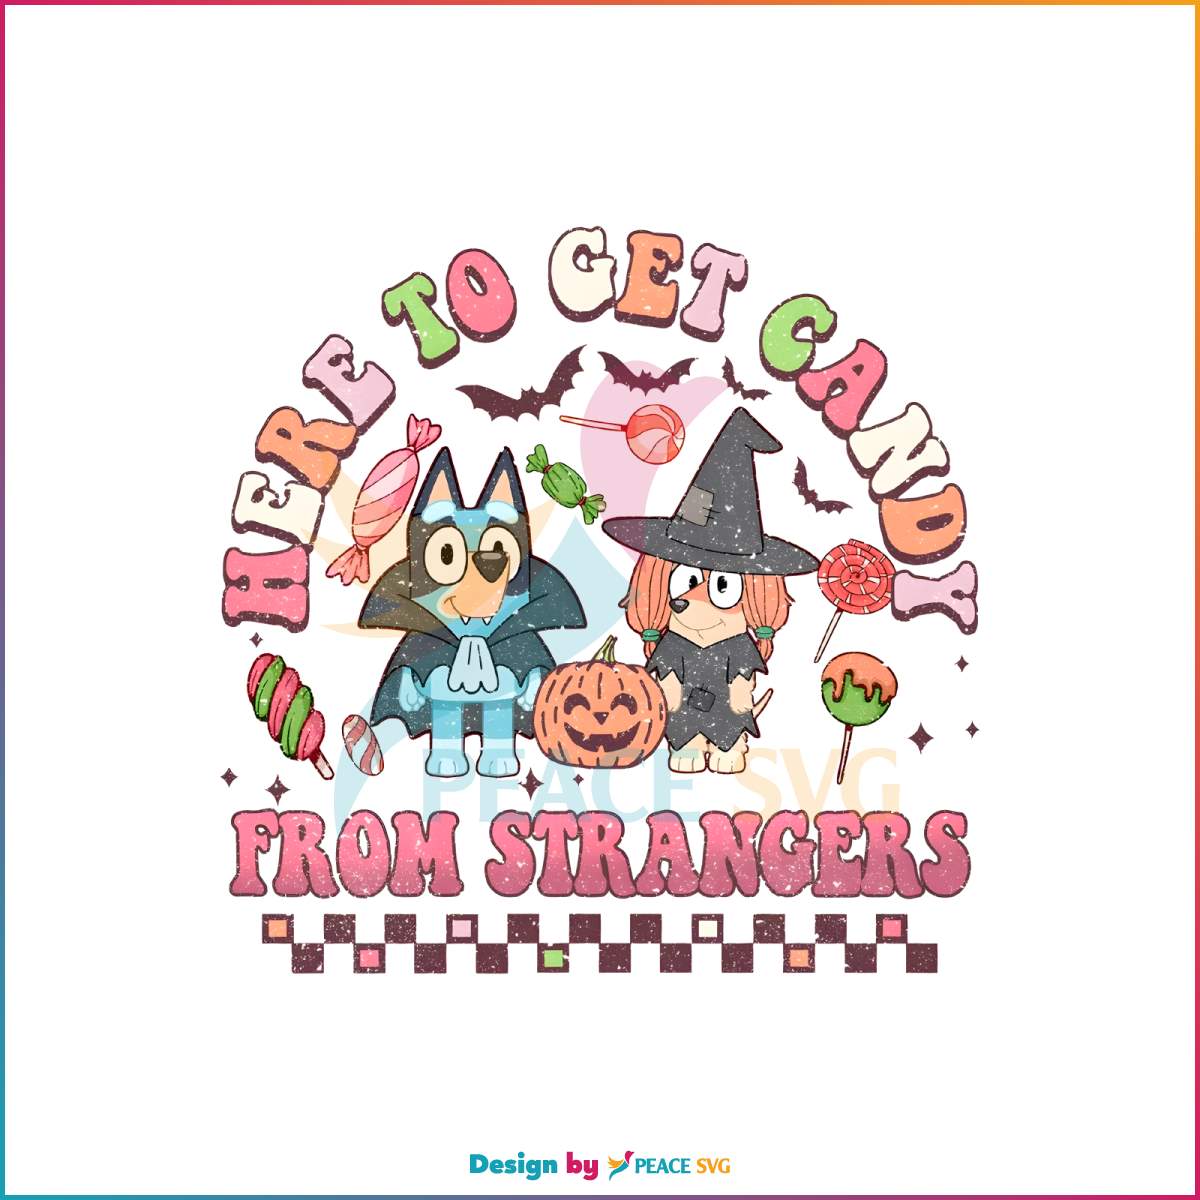 bluey-here-to-get-candy-from-strangers-png-download